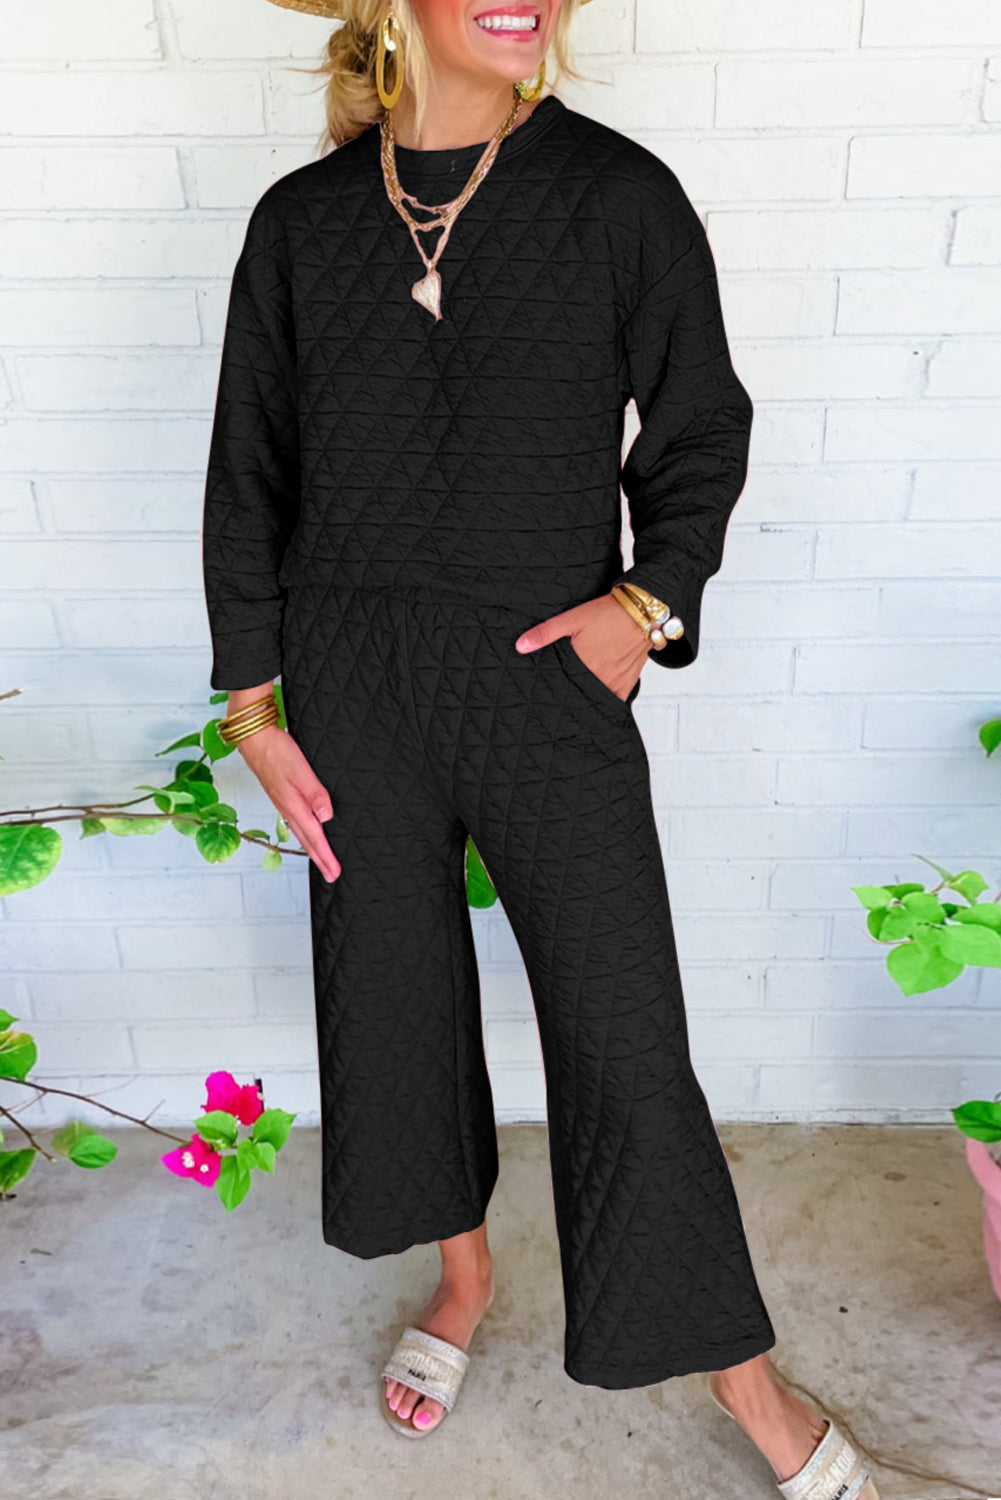 Black/Set 95%Polyester+5%Elastane Solid Quilted Pullover and Pants Outfit Set, Shirt, or Hoodie- various colors - women's pants set at TFC&H Co.